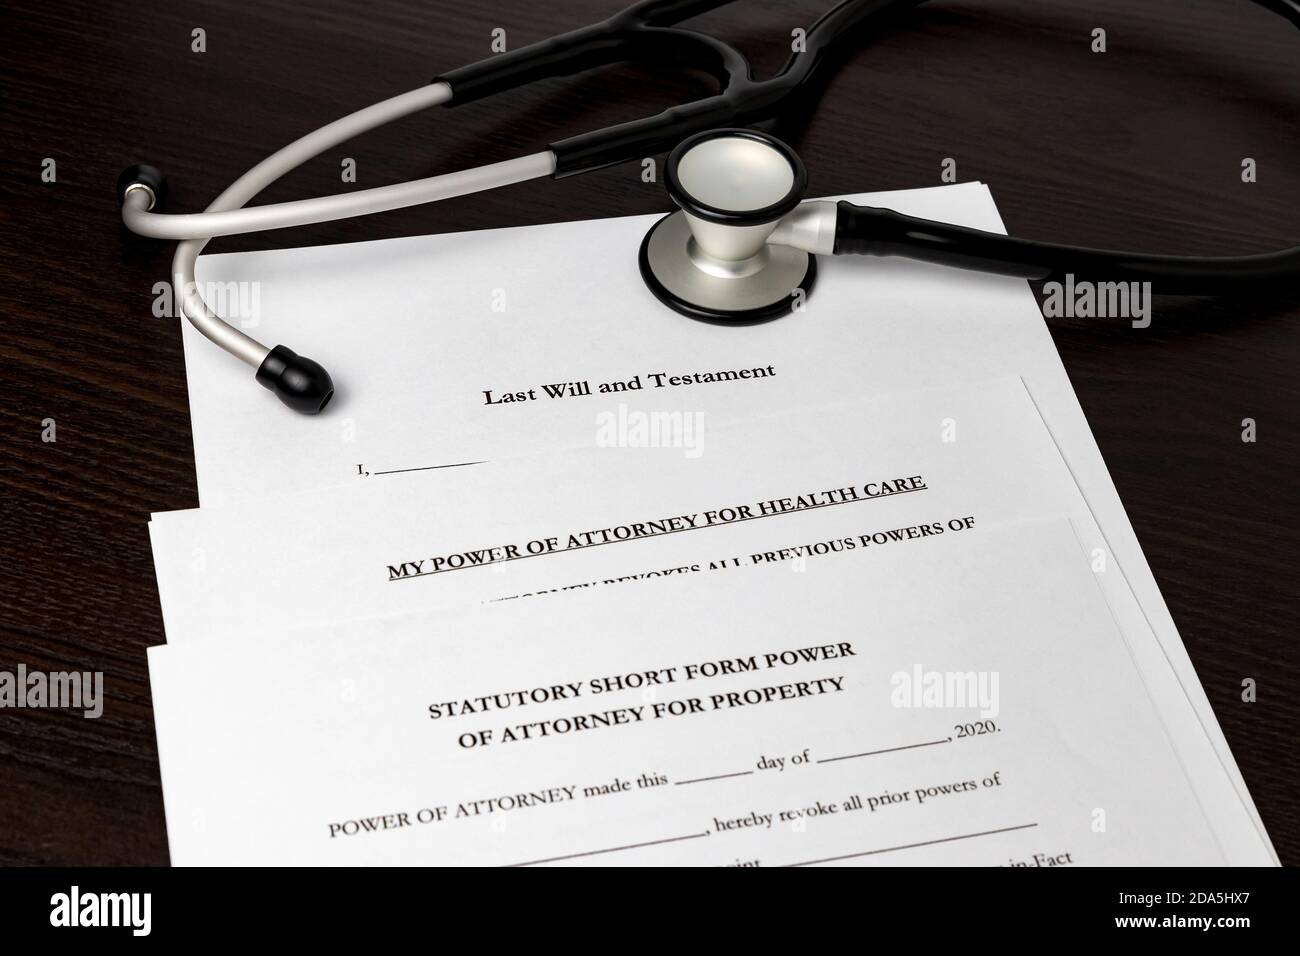 Last will and testament, Power of Attorney, POA with stethoscope. Concept of planning for death, final wishes, probate court system, guardianship and Stock Photo